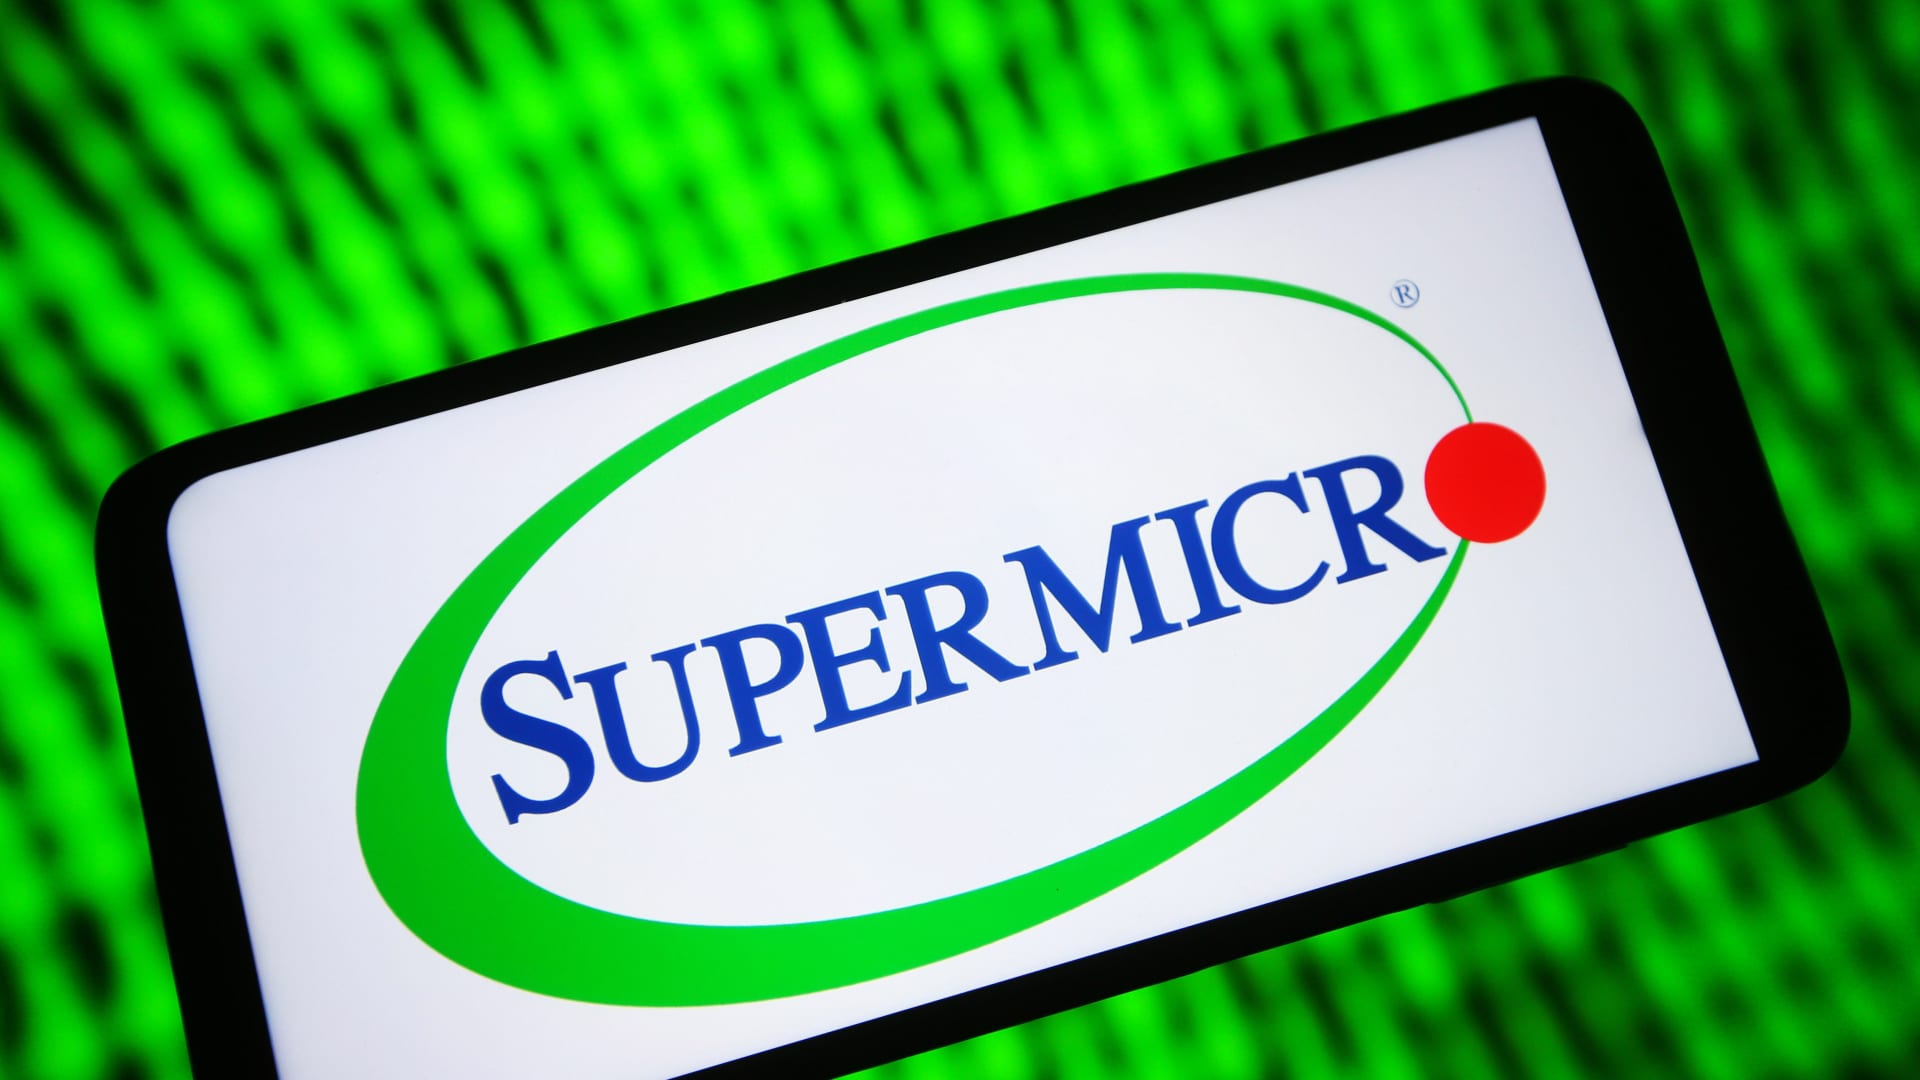 Super Micro Computer shares were choppy after Nvidia earnings. Here's where analysts see it going